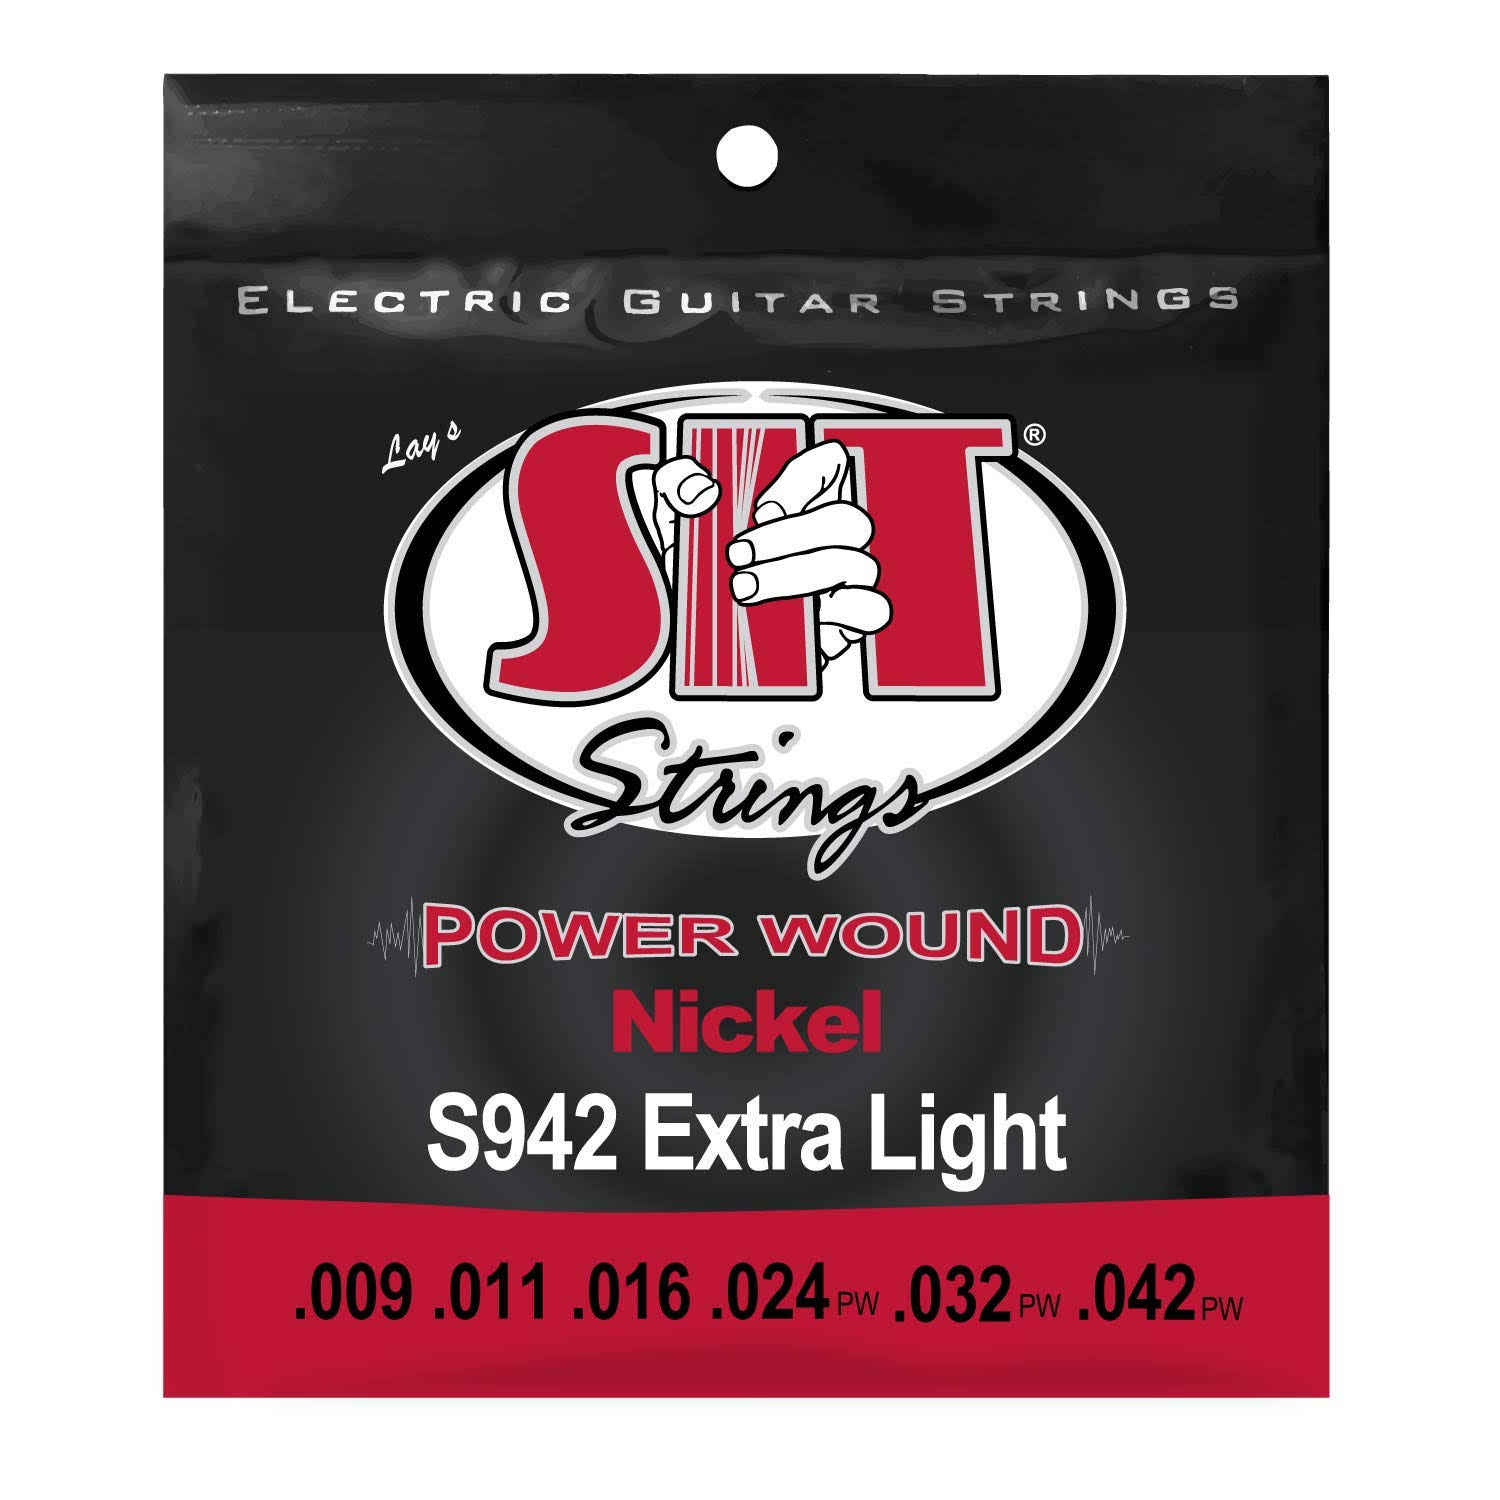 S.I.T. String Nickel Wound Electric Guitar String - S942 Extra Light